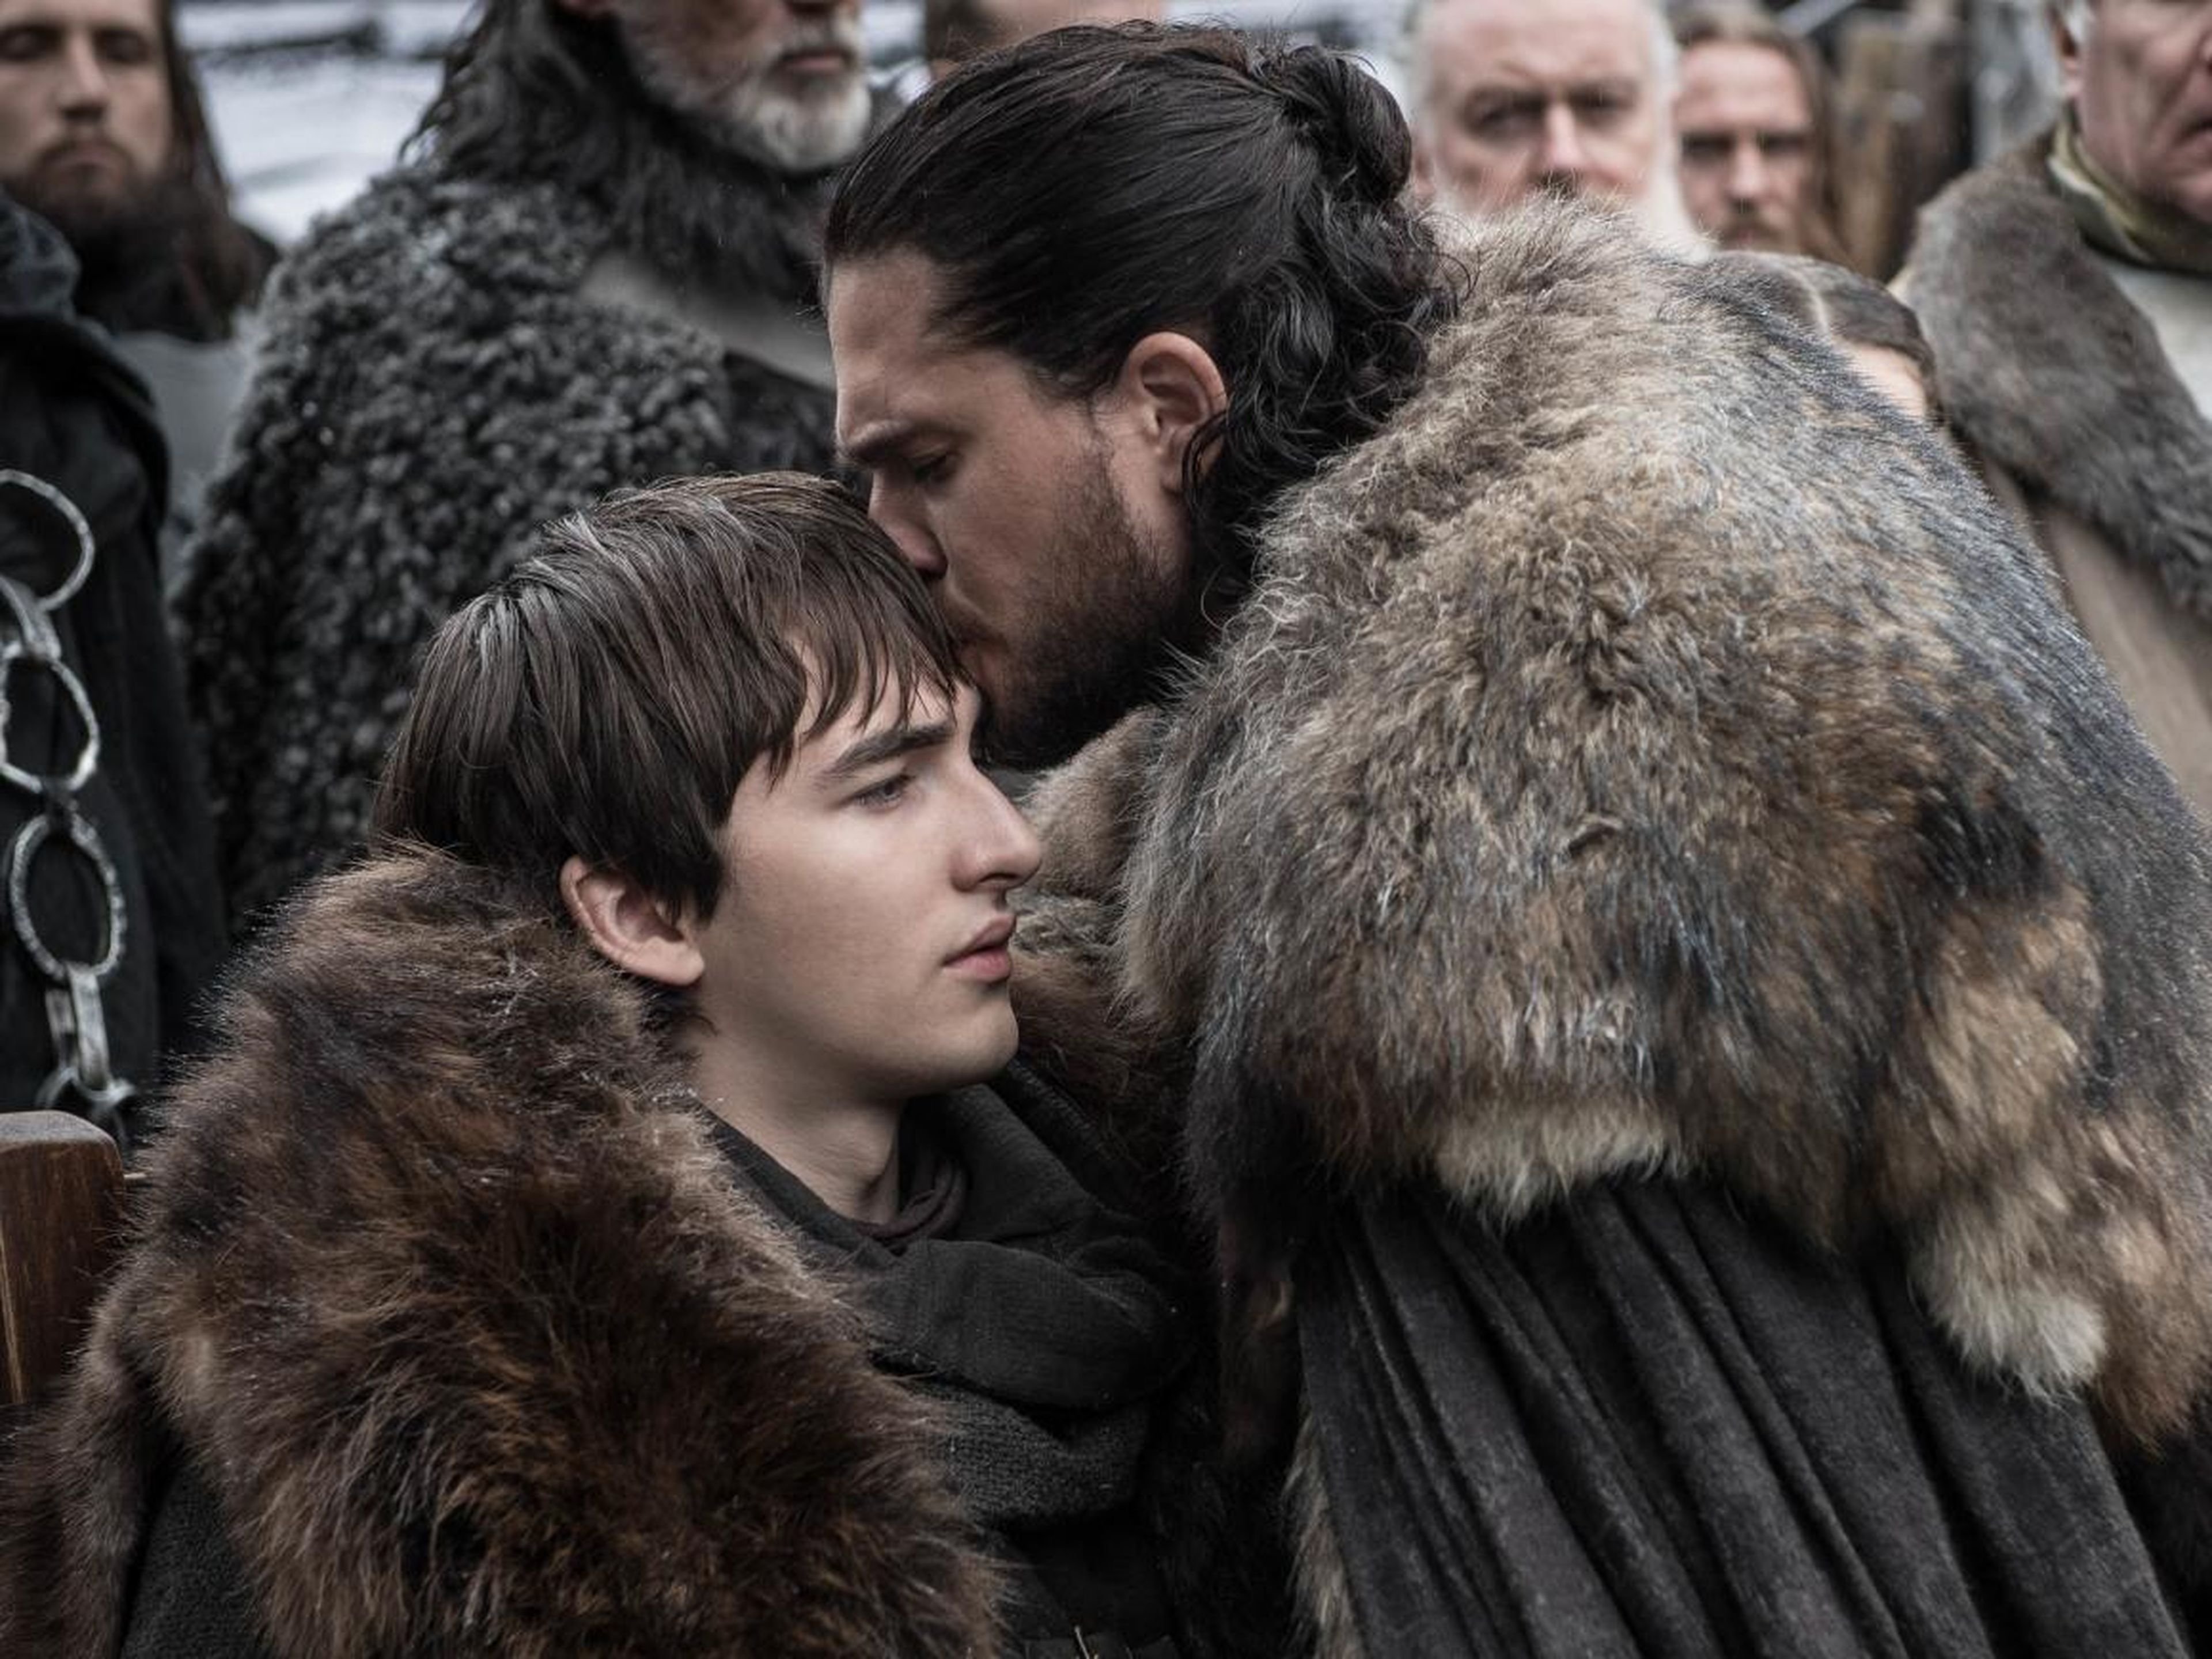 Bran is no longer the same person Jon once knew.